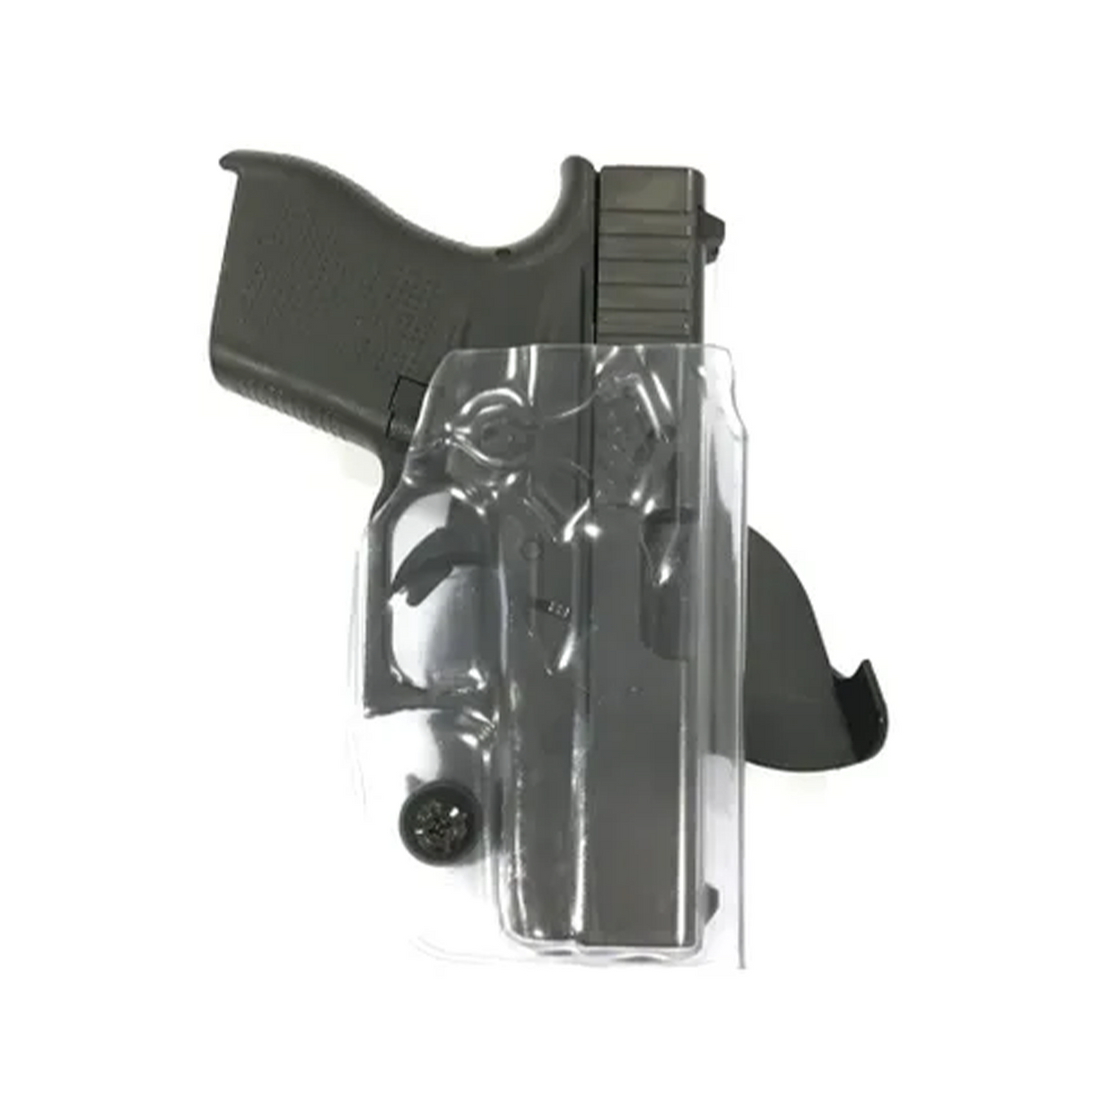 Kimber OWB Paddle Holsters